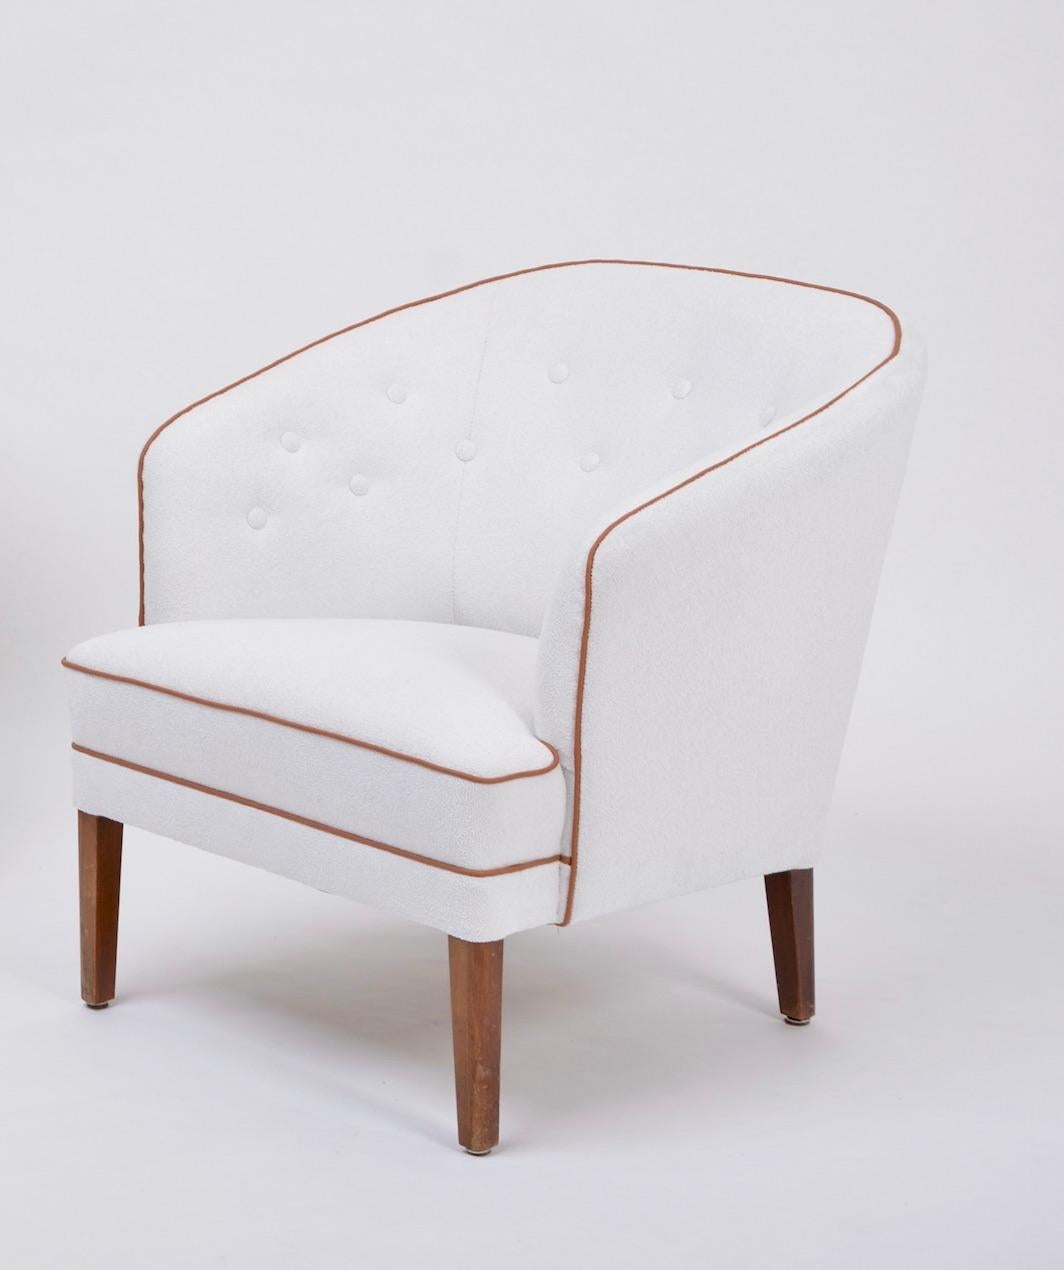 Rare armchair with elegant curves designed and produced by Danish master craftsman Ludvig Pontoppidan. The chairs are in excellent condition, as they have been re-upholstered.

When it came to Danish master craftsmen few if any, were better than